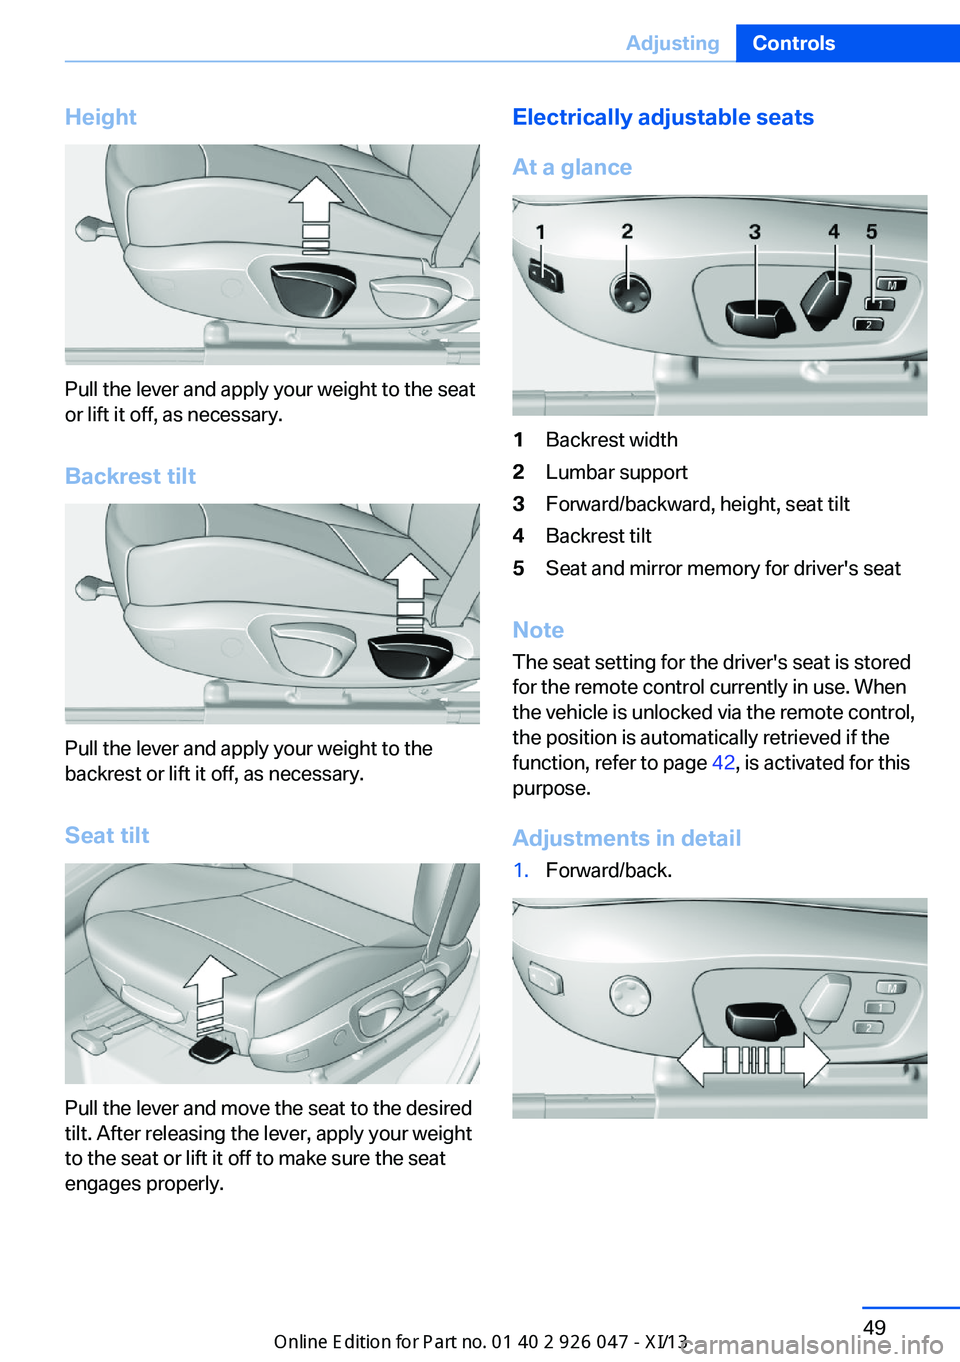 BMW X3 2013 F25 Owners Manual Height
Pull the lever and apply your weight to the seat
or lift it off, as necessary.
Backrest tilt
Pull the lever and apply your weight to the
backrest or lift it off, as necessary.
Seat tilt
Pull th